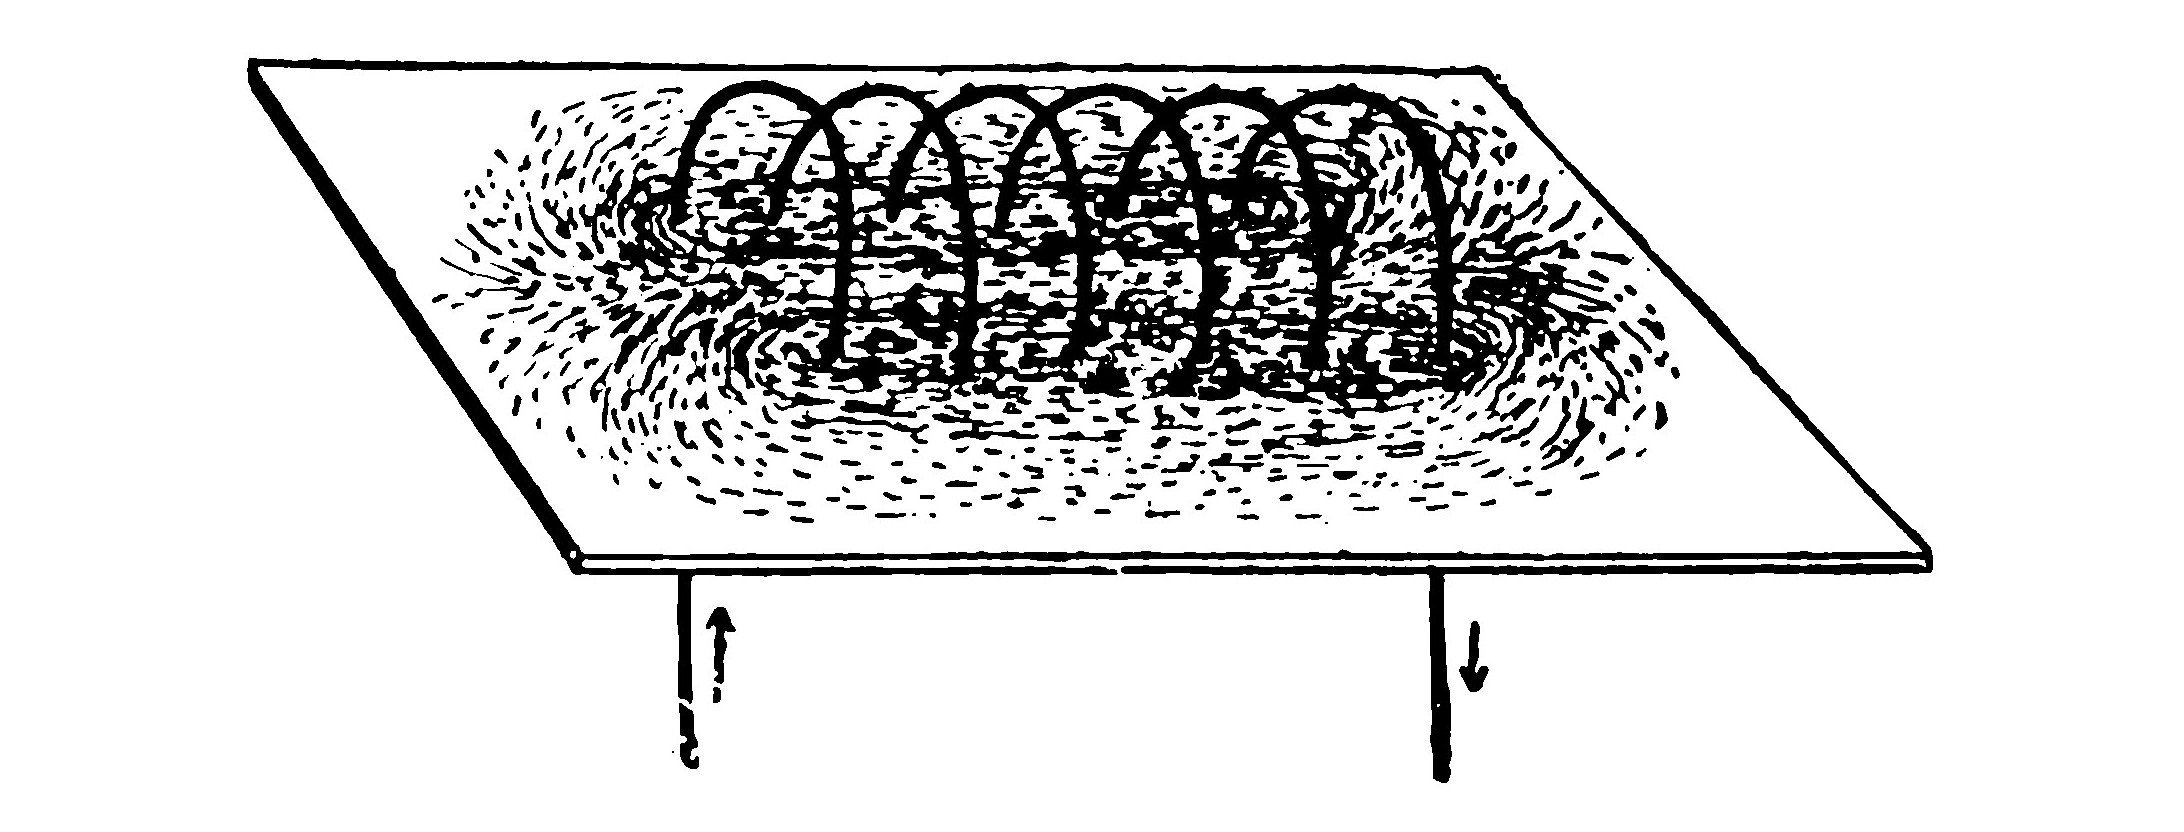 FIG. 181.—Magnetic Phantom about a Coil of Wire carrying a current.